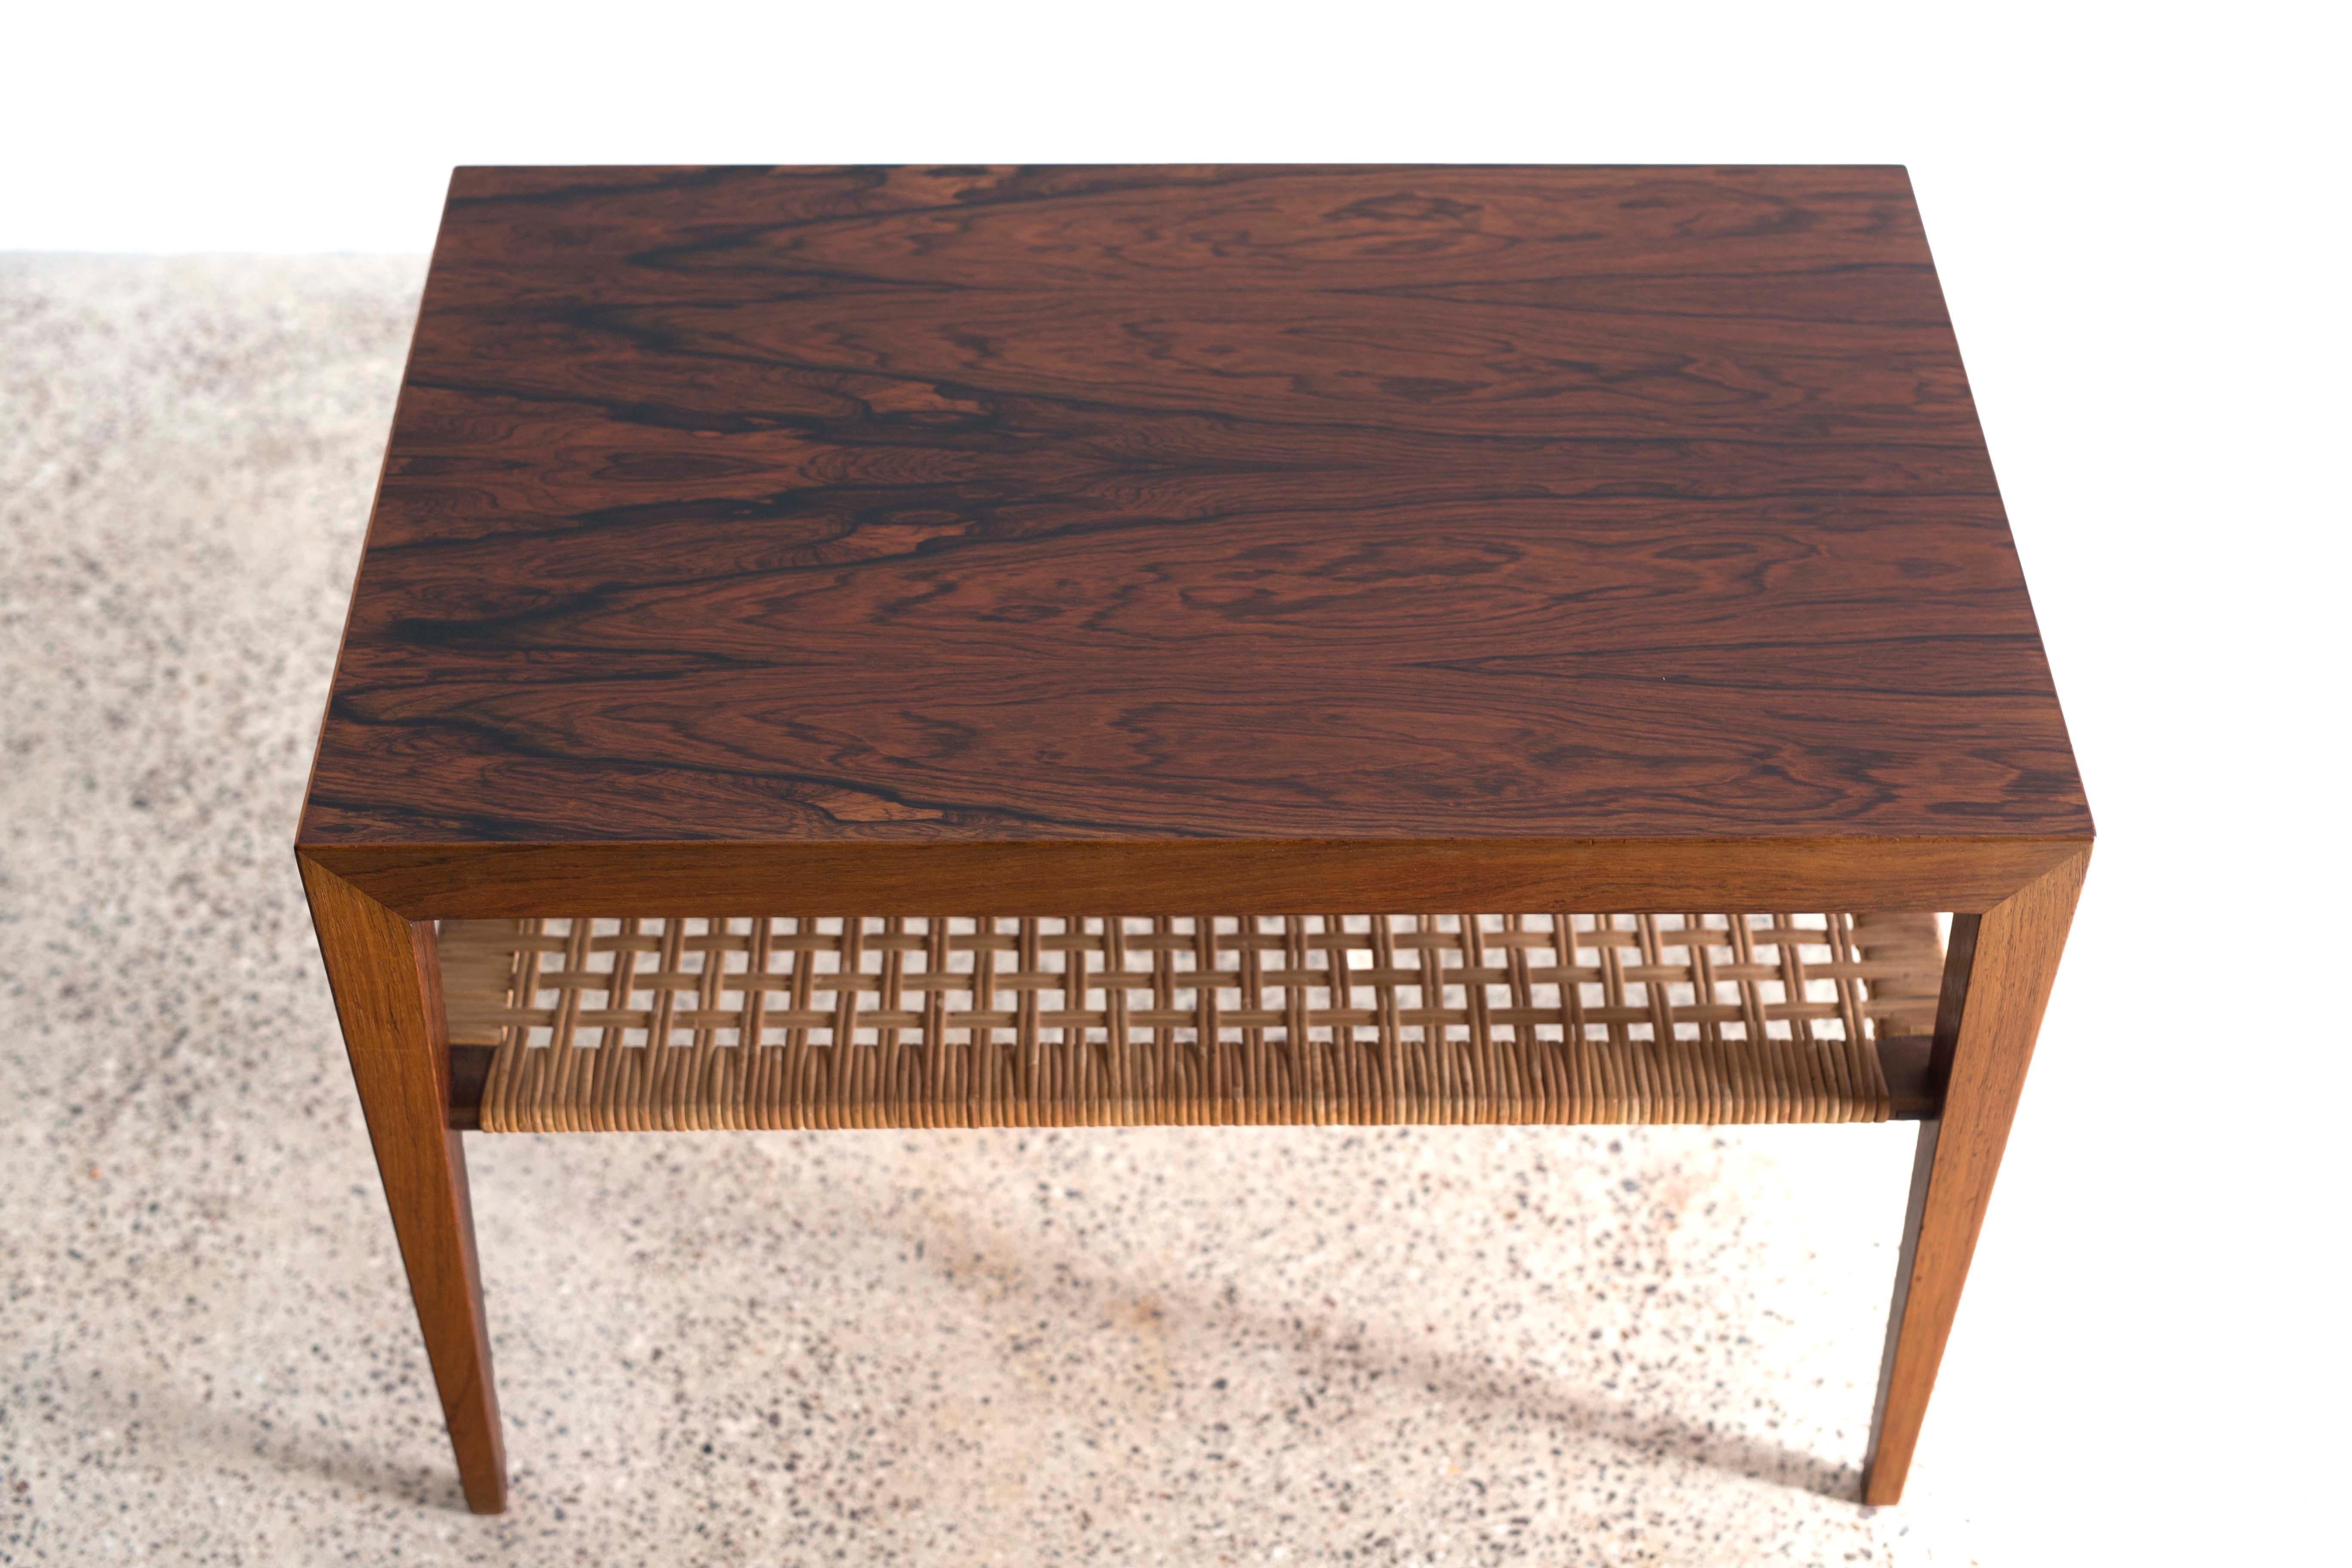 A Severin Hansen side or coffee table in Brazilian rosewood with cane shelf. 

Designed by Severin Hansen 1960s and made at Haslev møbelsnedkeri in Denmark.